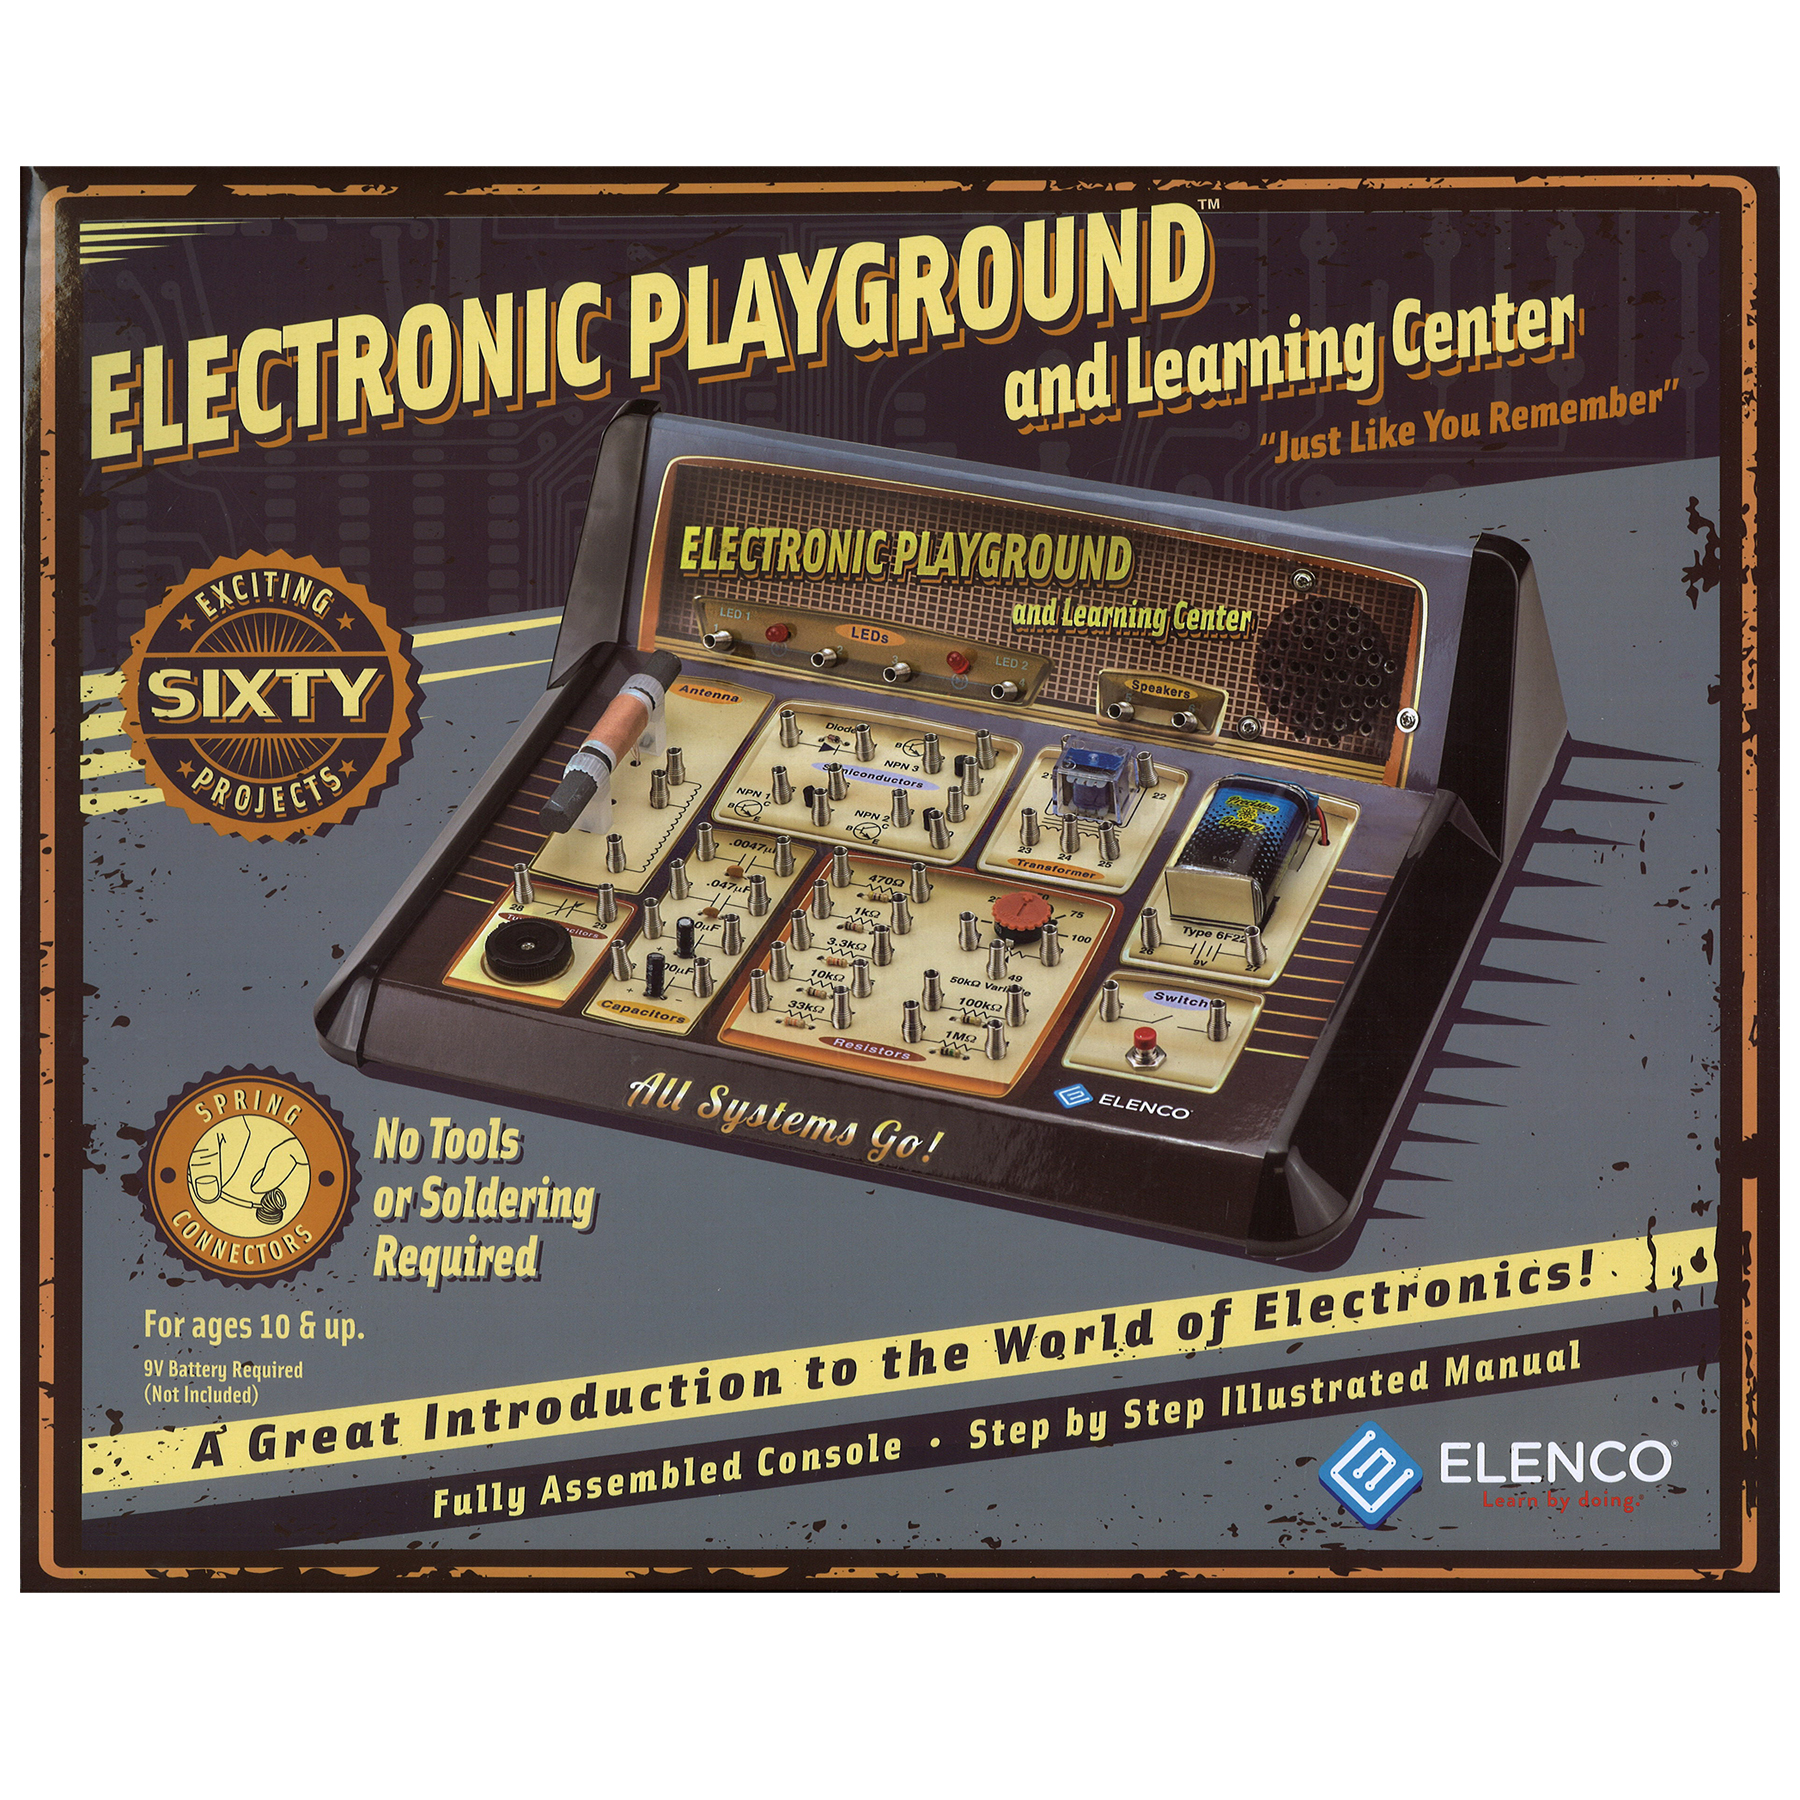 Elenco Electronic Playground and Learning Center